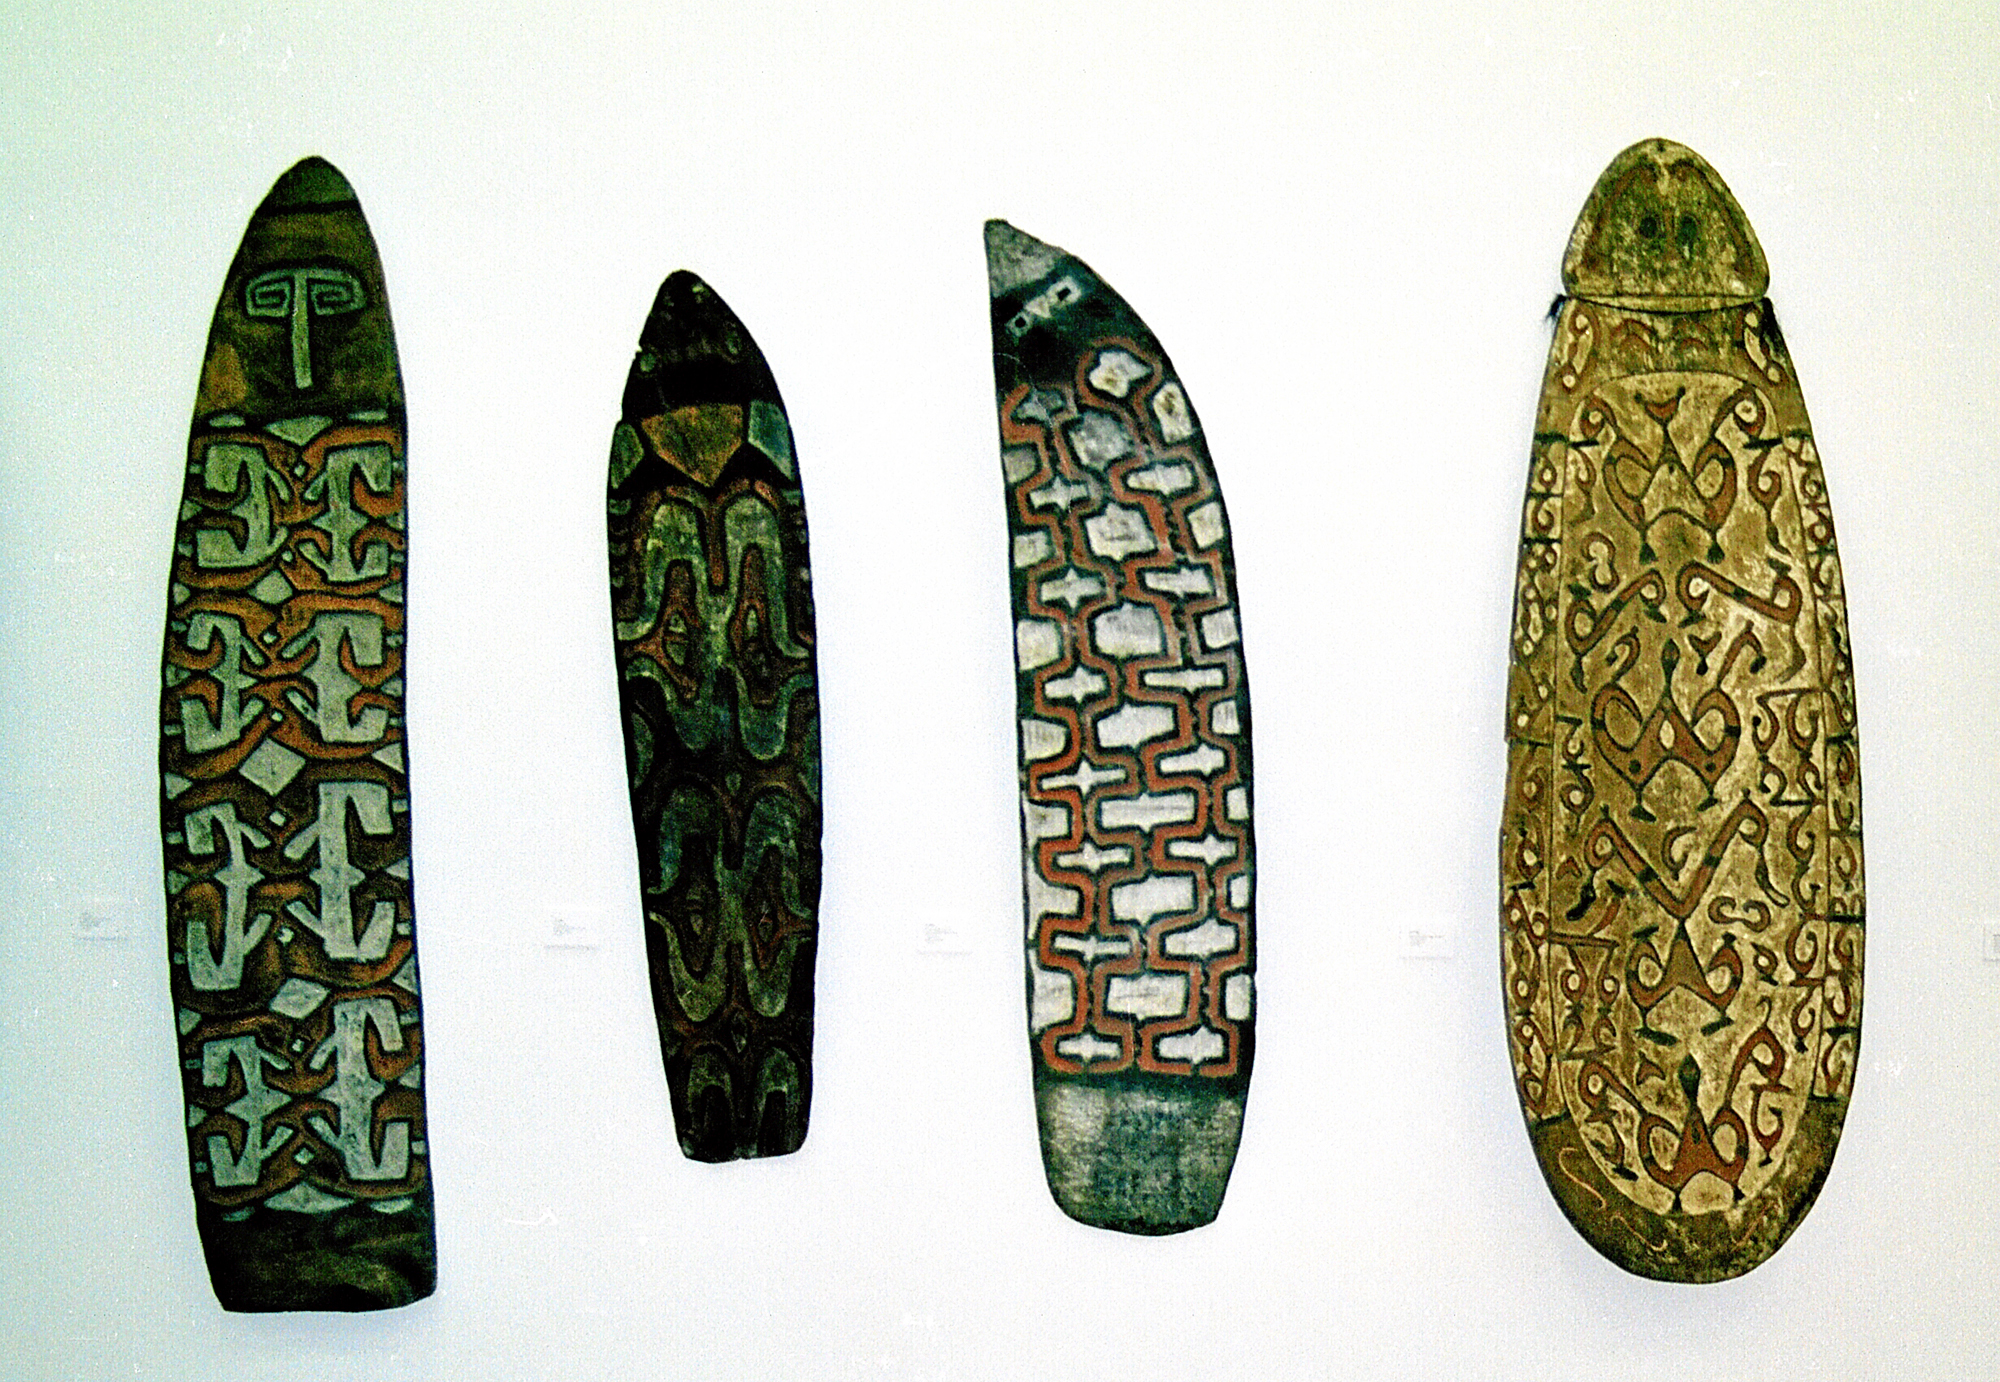 Exhibition: The Shields of Melanesia at The Sydney 2000 Olympic Arts Festival Sydney College of the Arts